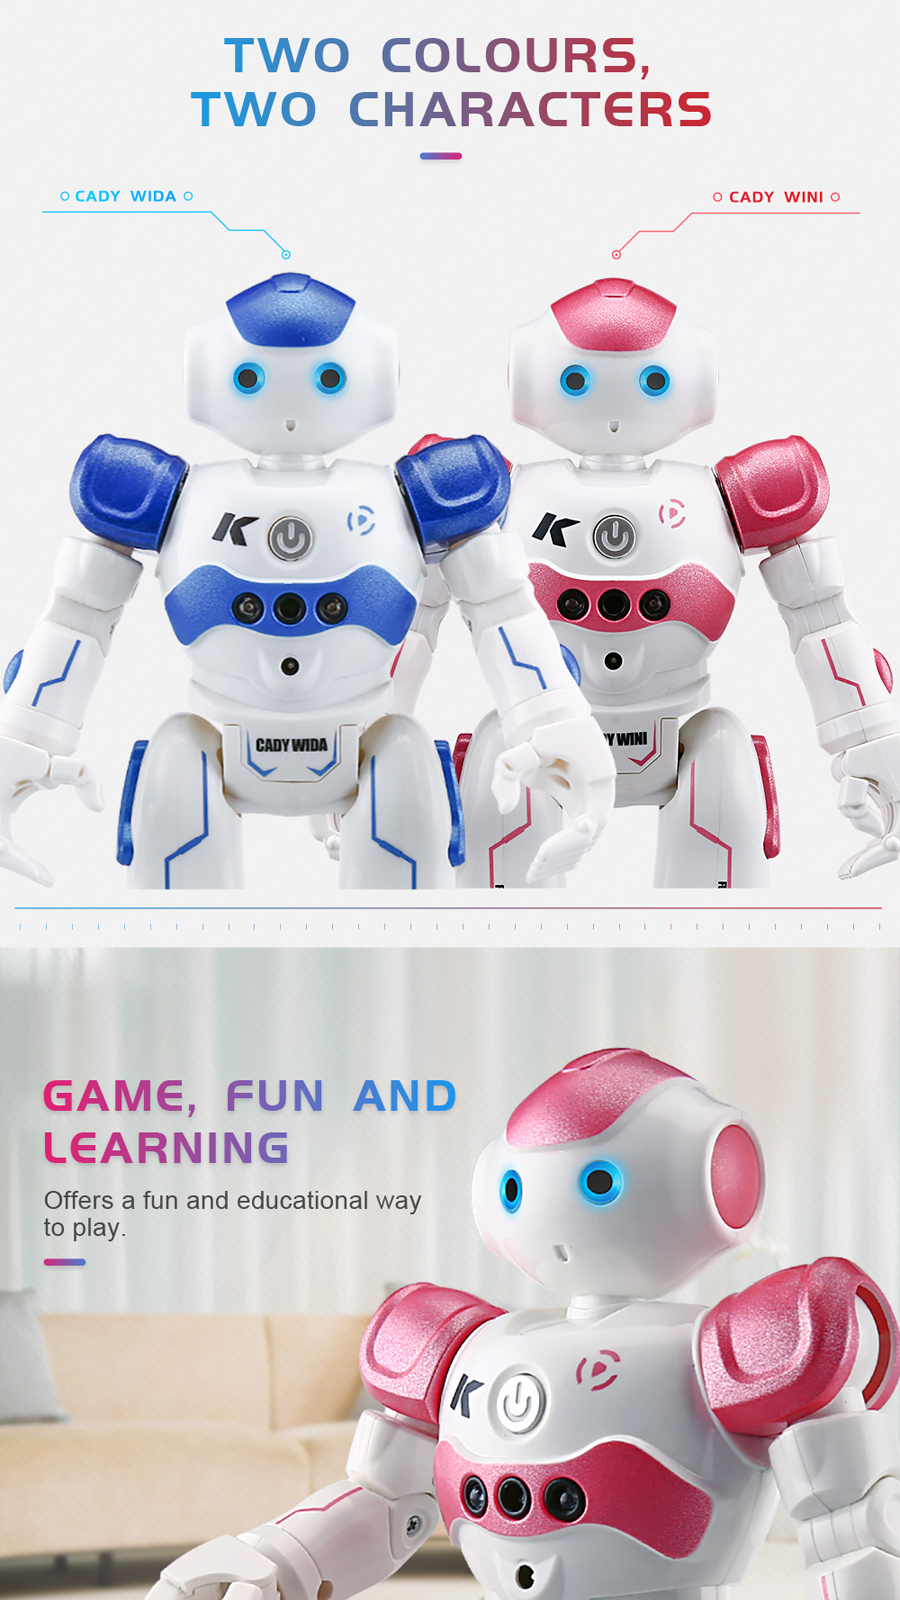 JJRC-R2-Cady-USB-Charging-Dancing-Gesture-Control-Robot-Toy-1181780-3